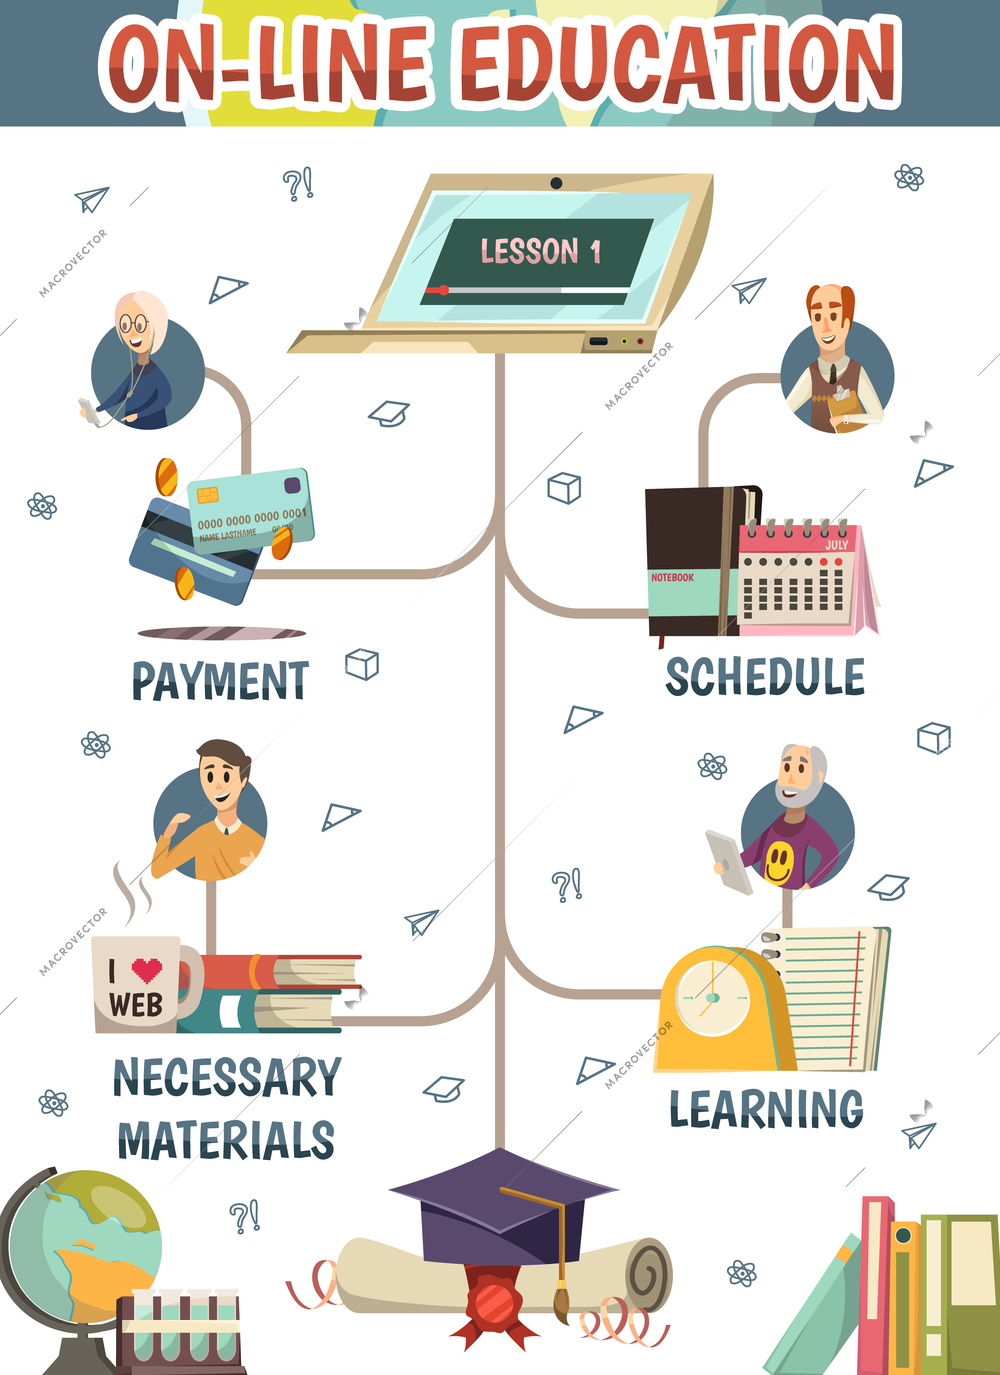 Online education orthogonal flowchart with payment schedule necessary materials and learning flat compositions vector illustration